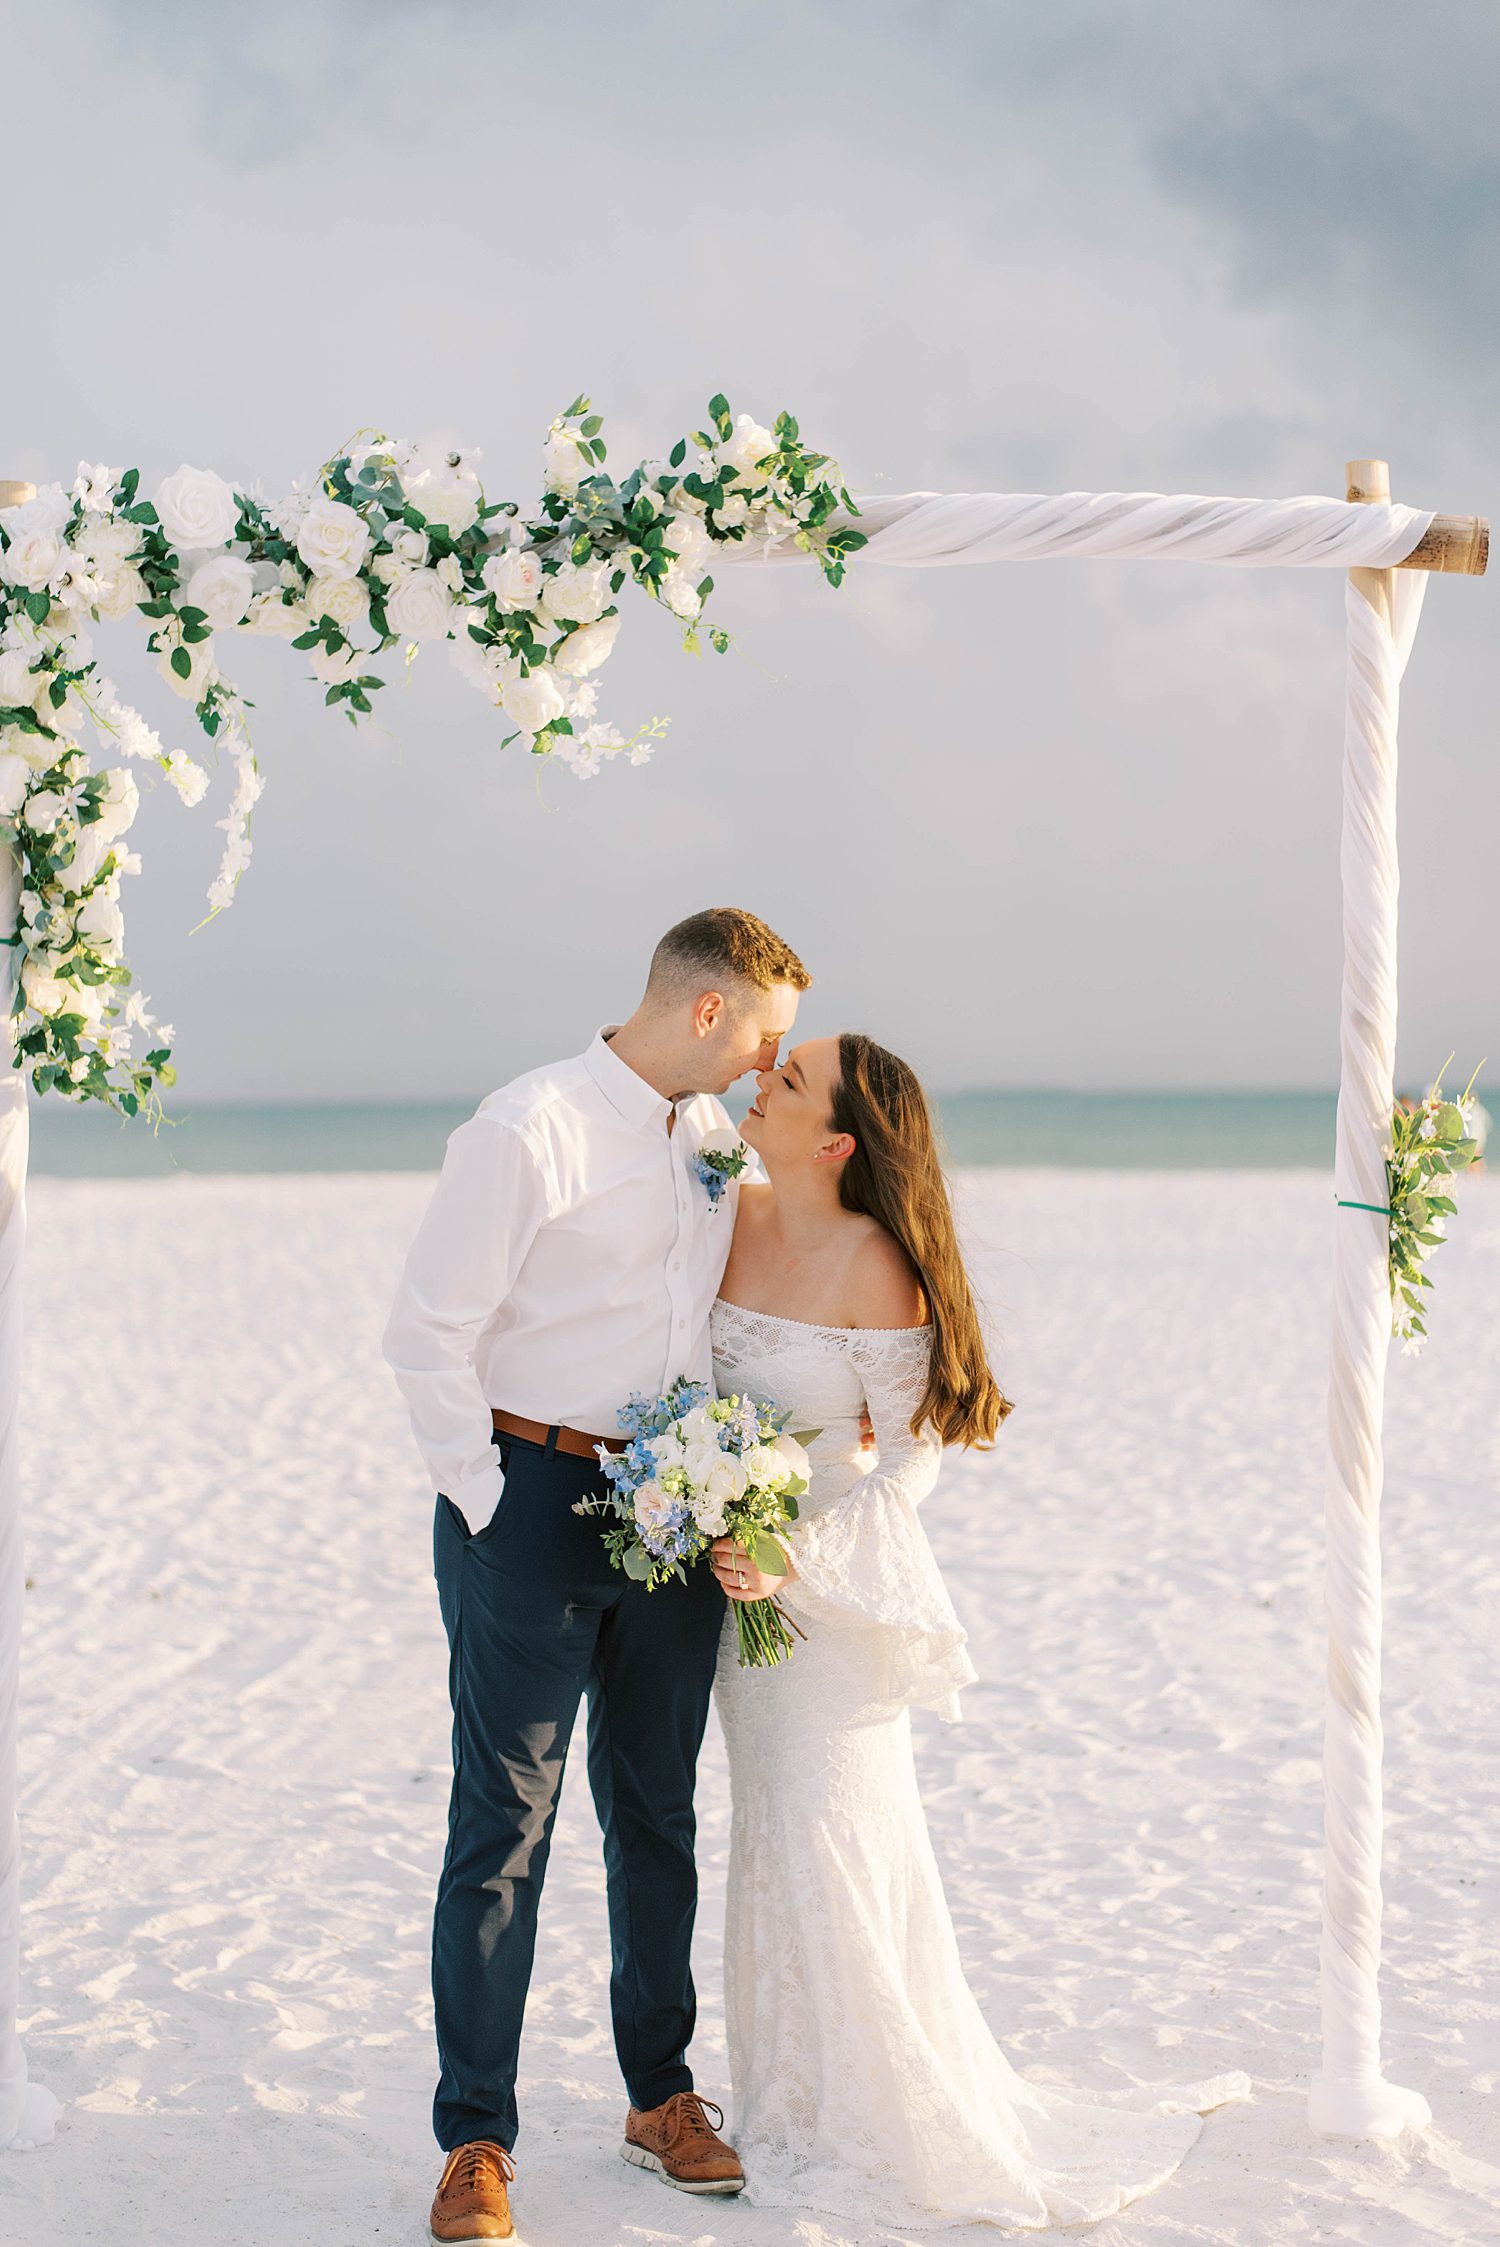 bride and groom kiss under floral arbor on beach wedding day